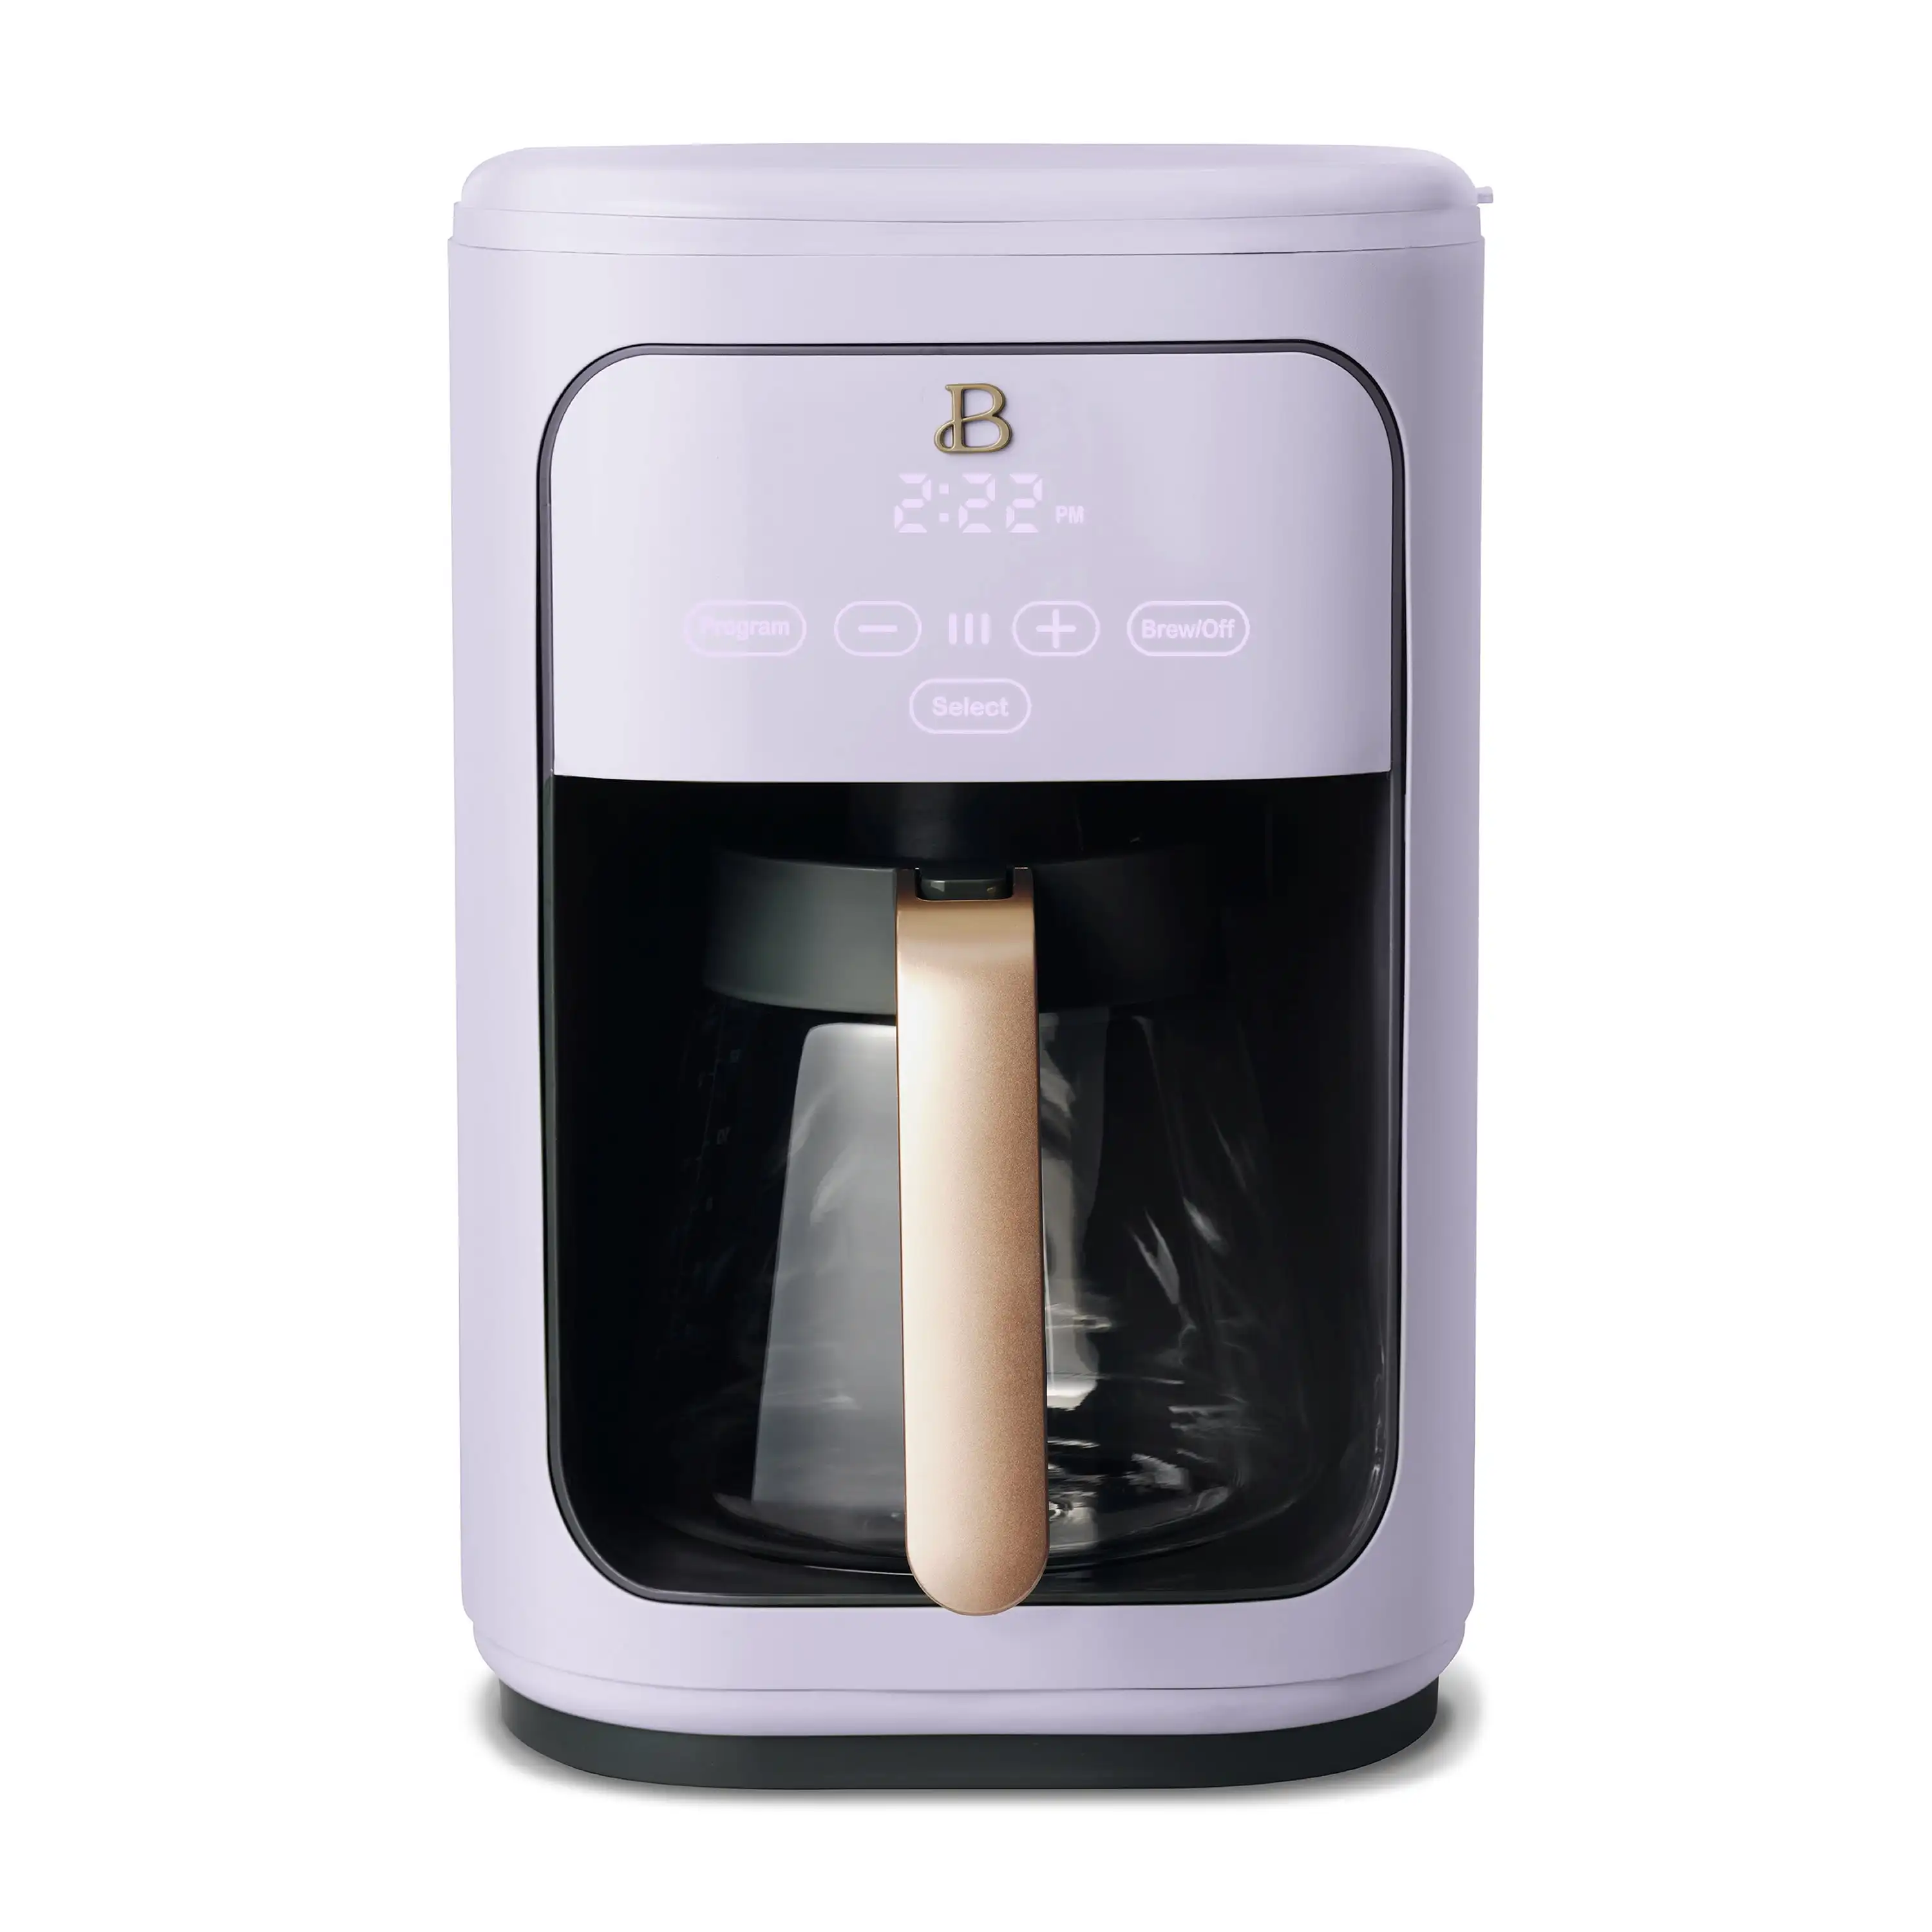 

Beautiful 14 Cup Programmable Touchscreen Coffee Maker, Lavender by Drew Barrymore